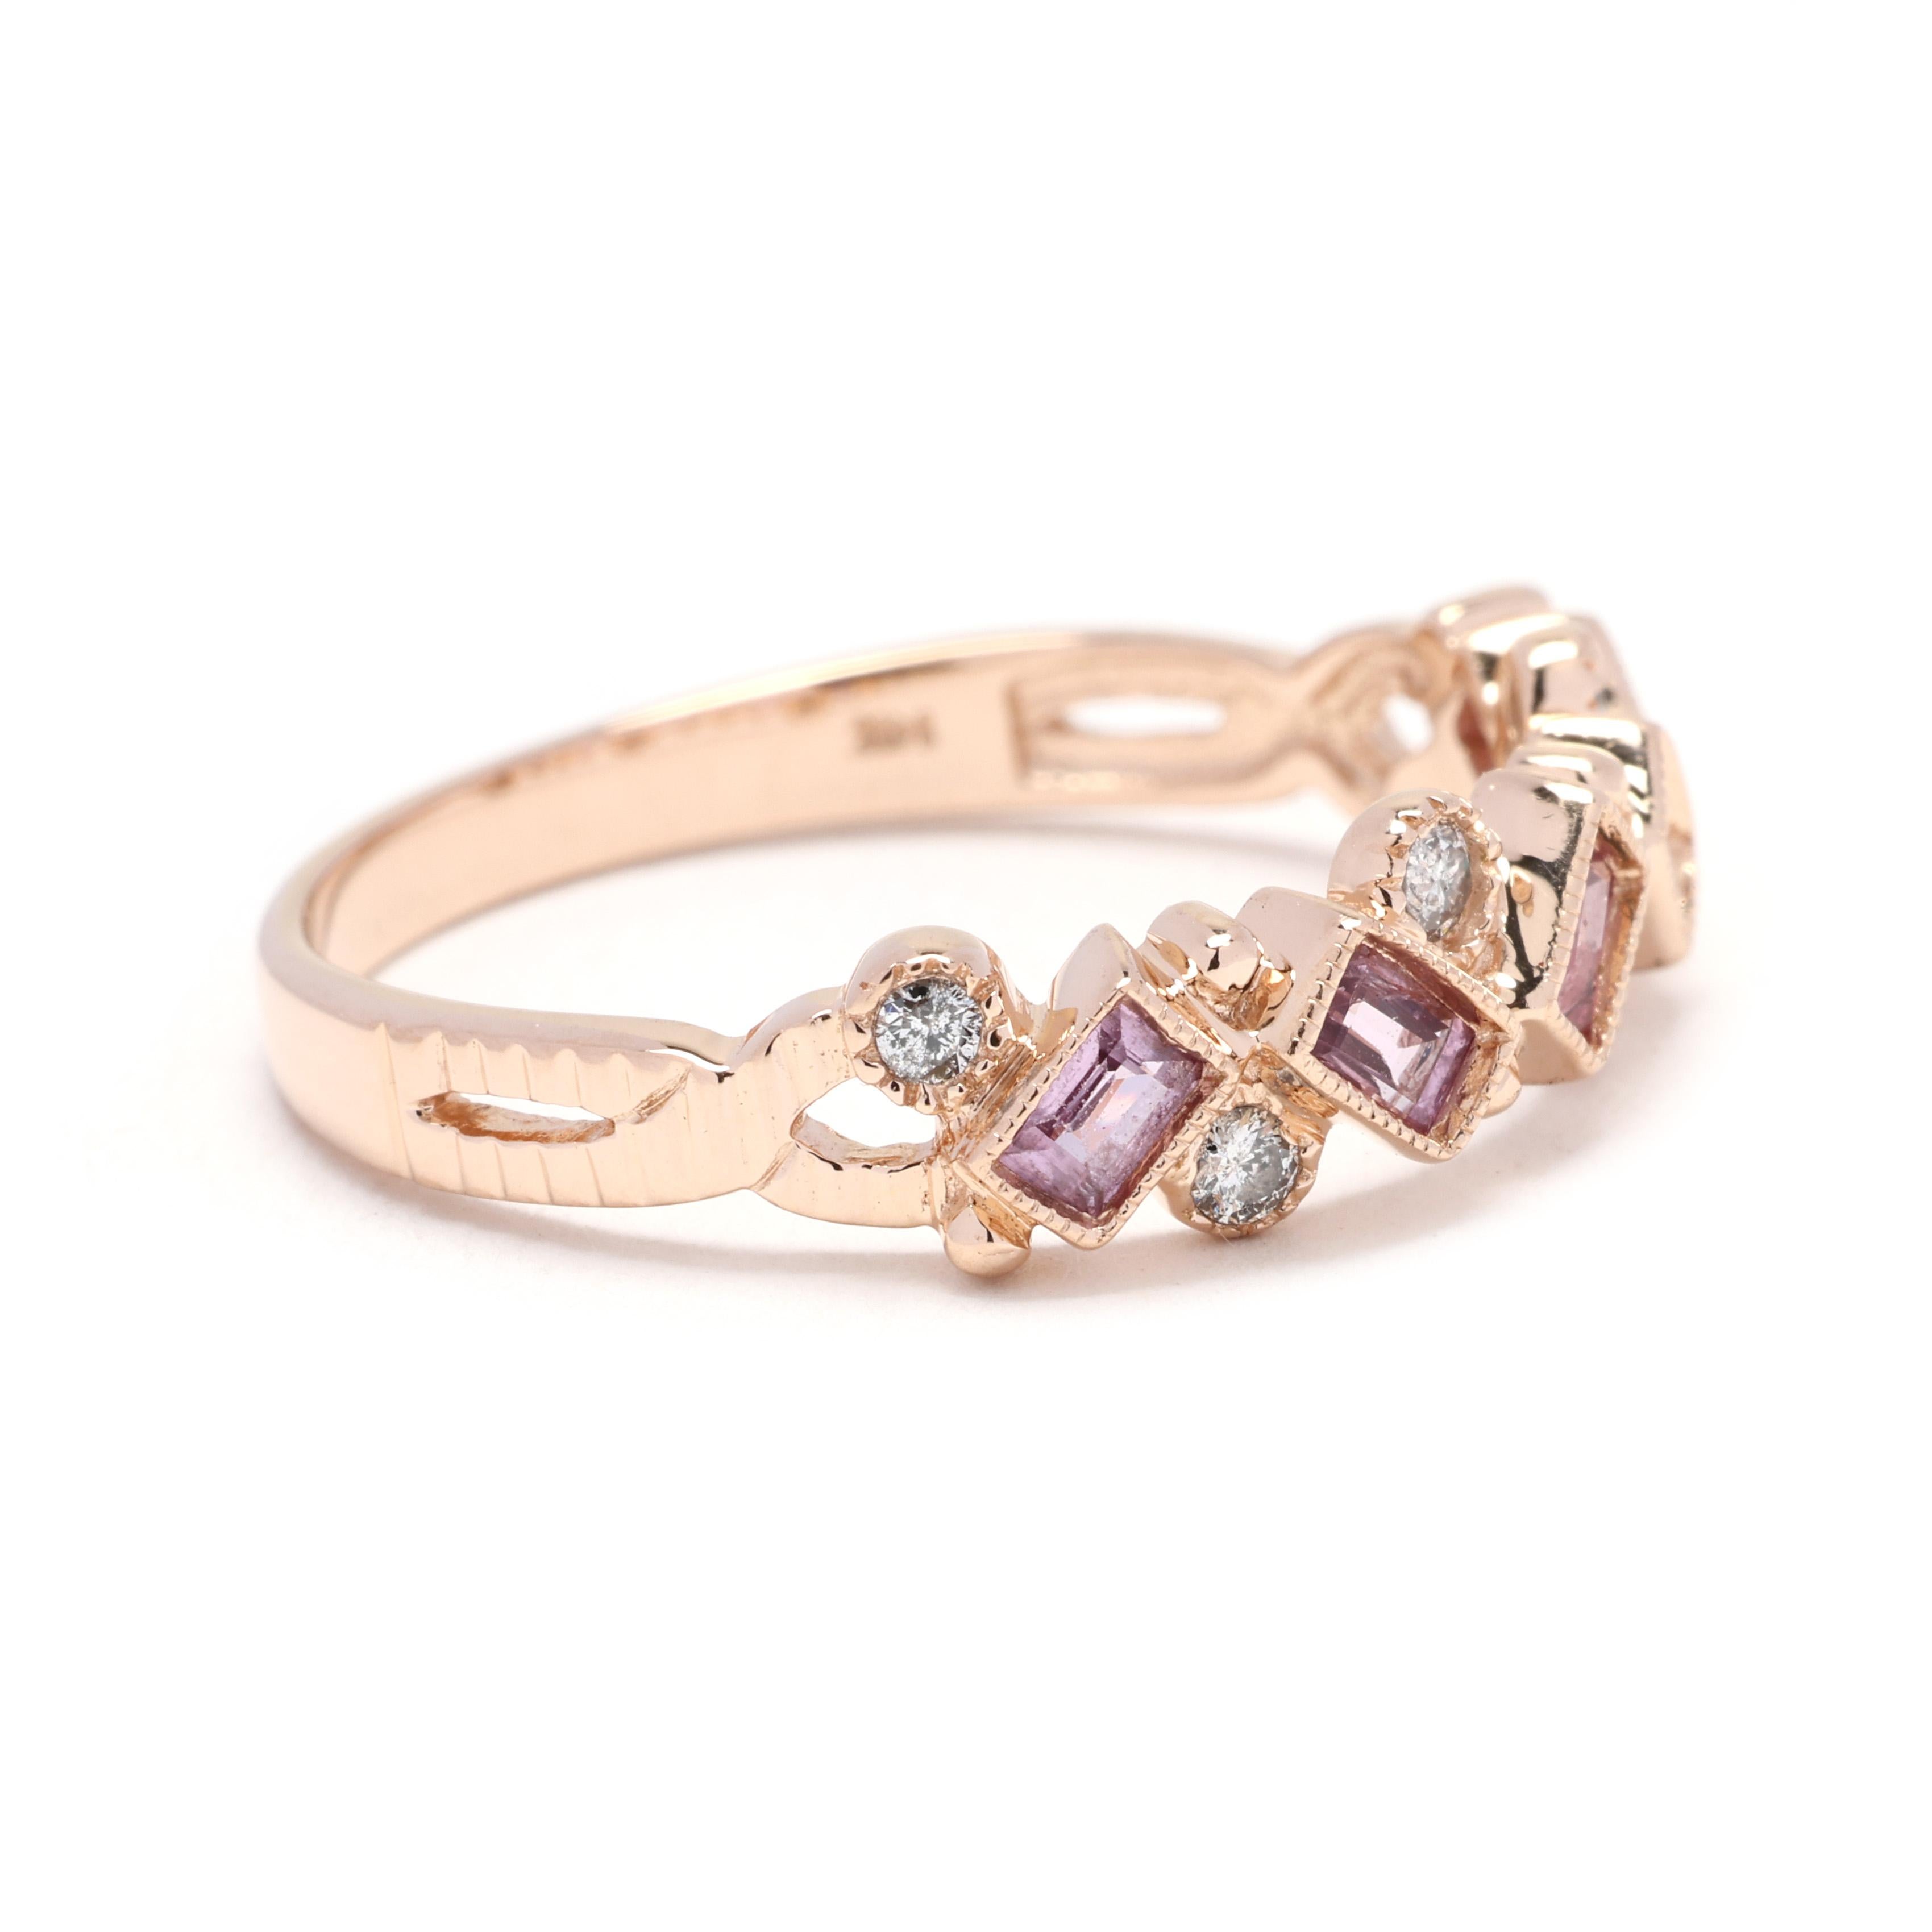 This 0.52ctw pink sapphire and diamond ring is a beautiful and elegant piece of jewelry. Made from 14k yellow gold, this stackable band features a stunning oval pink sapphire center stone, surrounded by a halo of sparkling diamonds. The pink